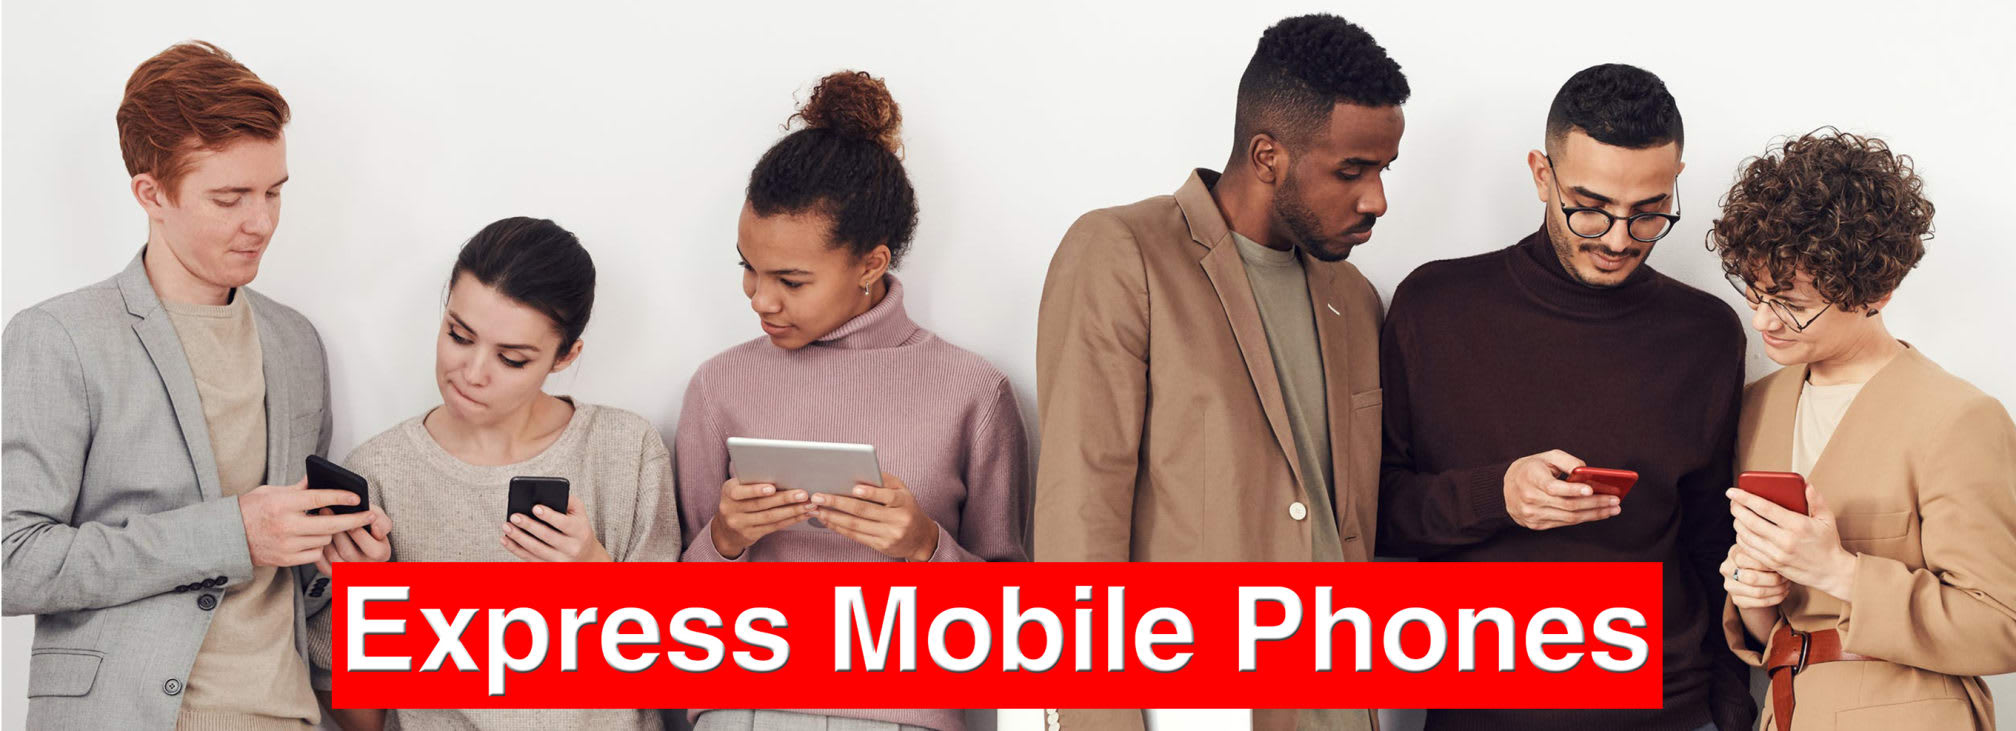 Images Express Mobile Phones